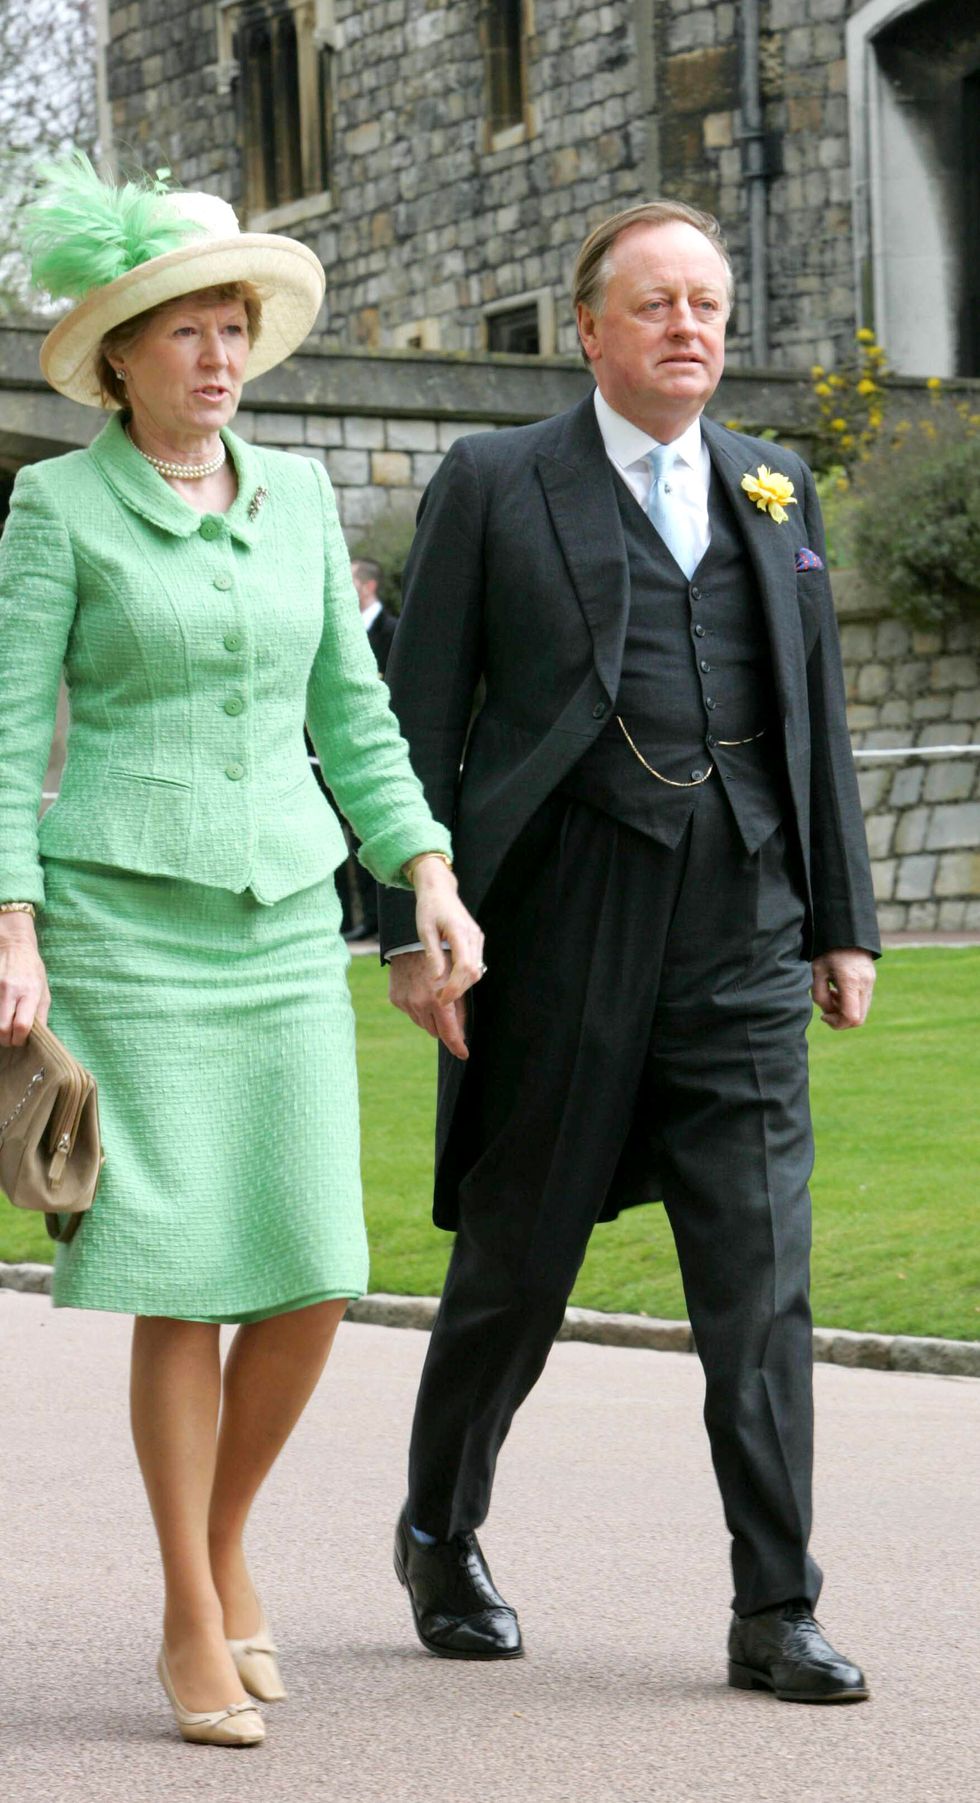 The Royal Wedding of HRH Prince Charles and Mrs. Camilla Parker Bowles - The Blessing Ceremony - Arrivals